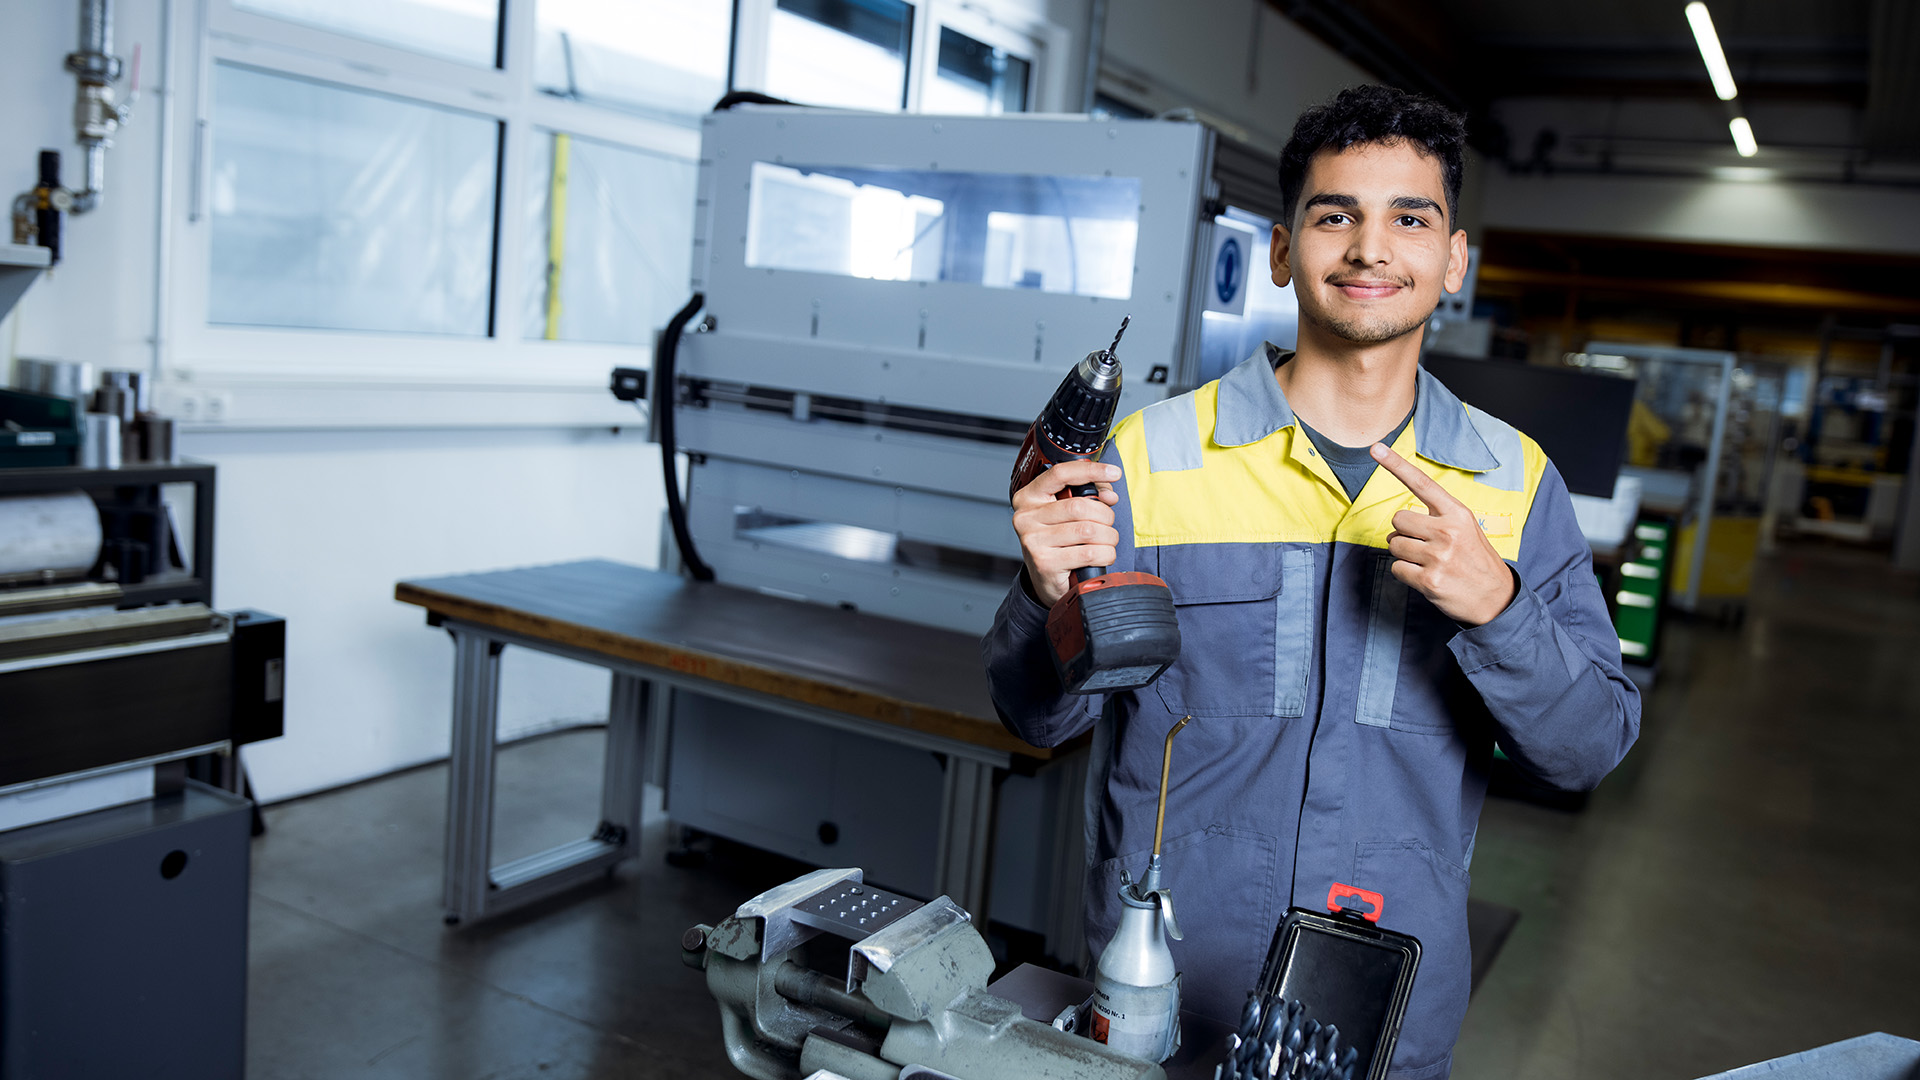 An apprentice with a tool in his hand smiles into the camera with commitment.